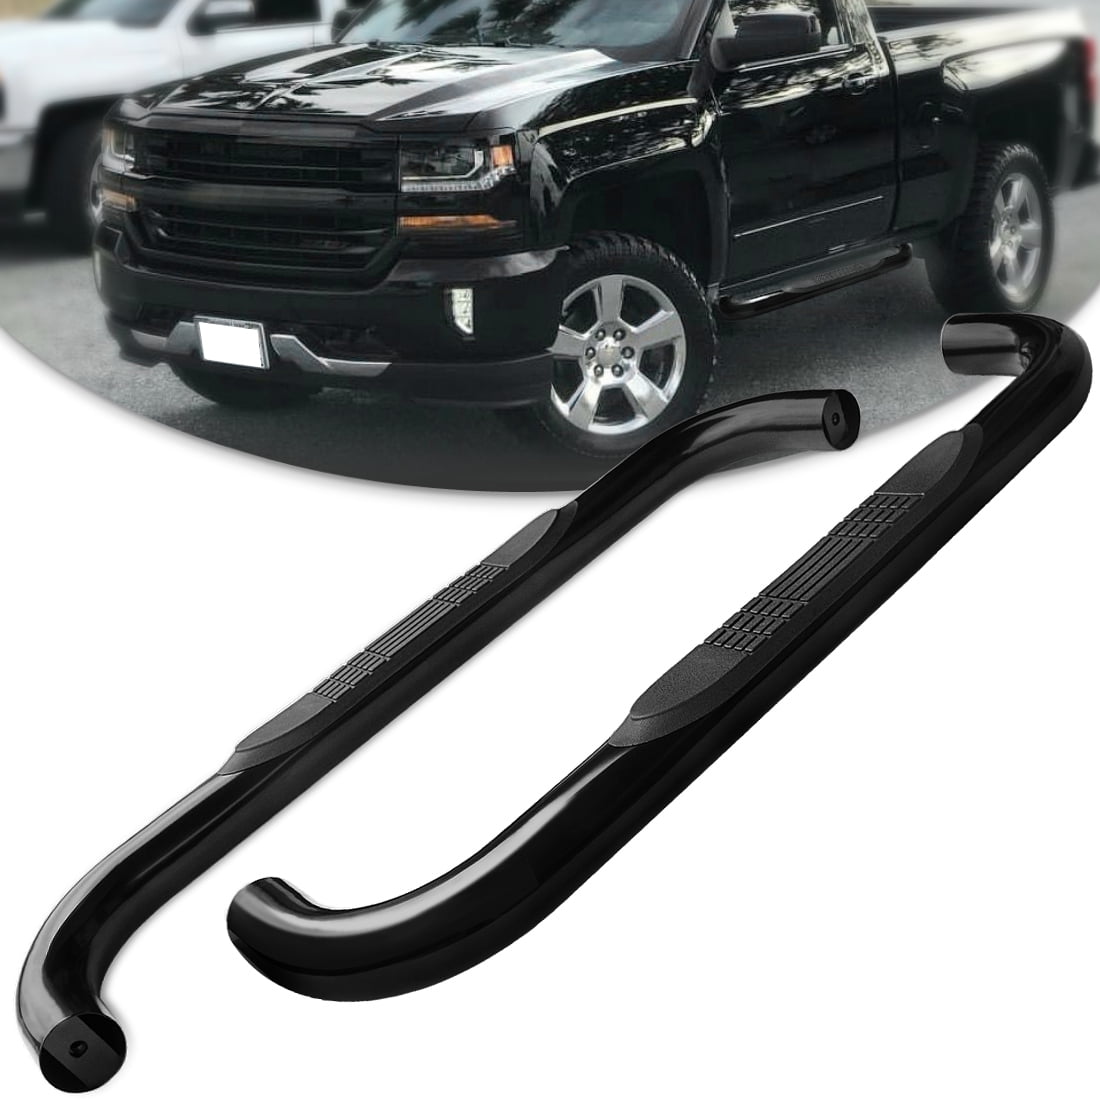 3 Inches Black Running Board Side Step Nerf Bar Compatible with Chevy Silverado/GMC Sierra Regular Cab 99-16 